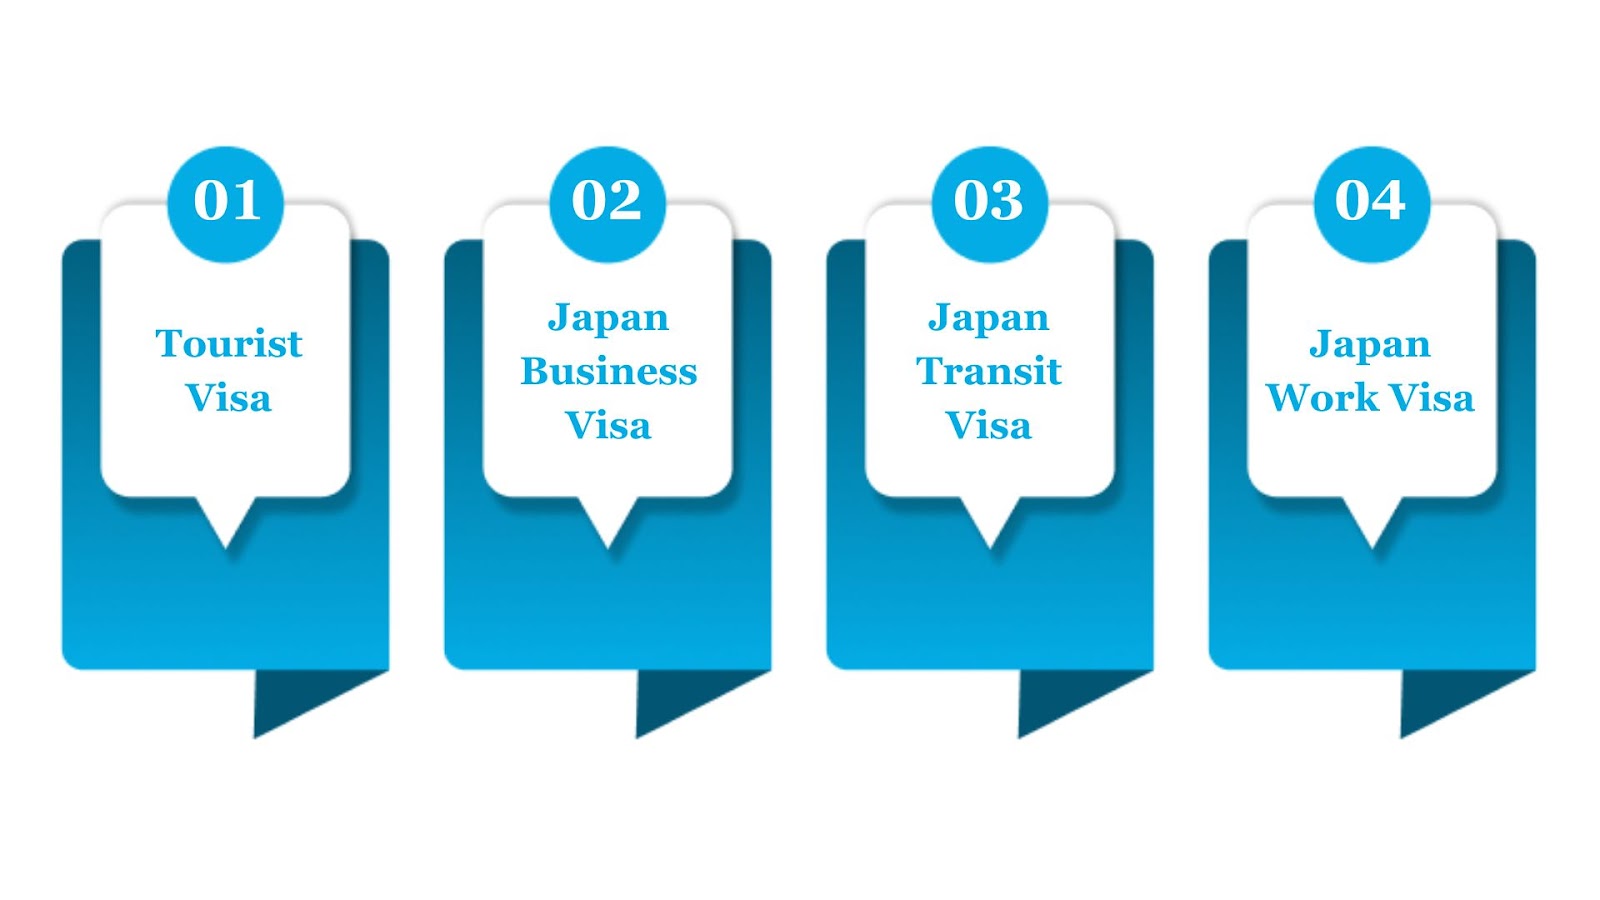 Japan Study Visa: Requirements, Fees, and Cost for Indian Students